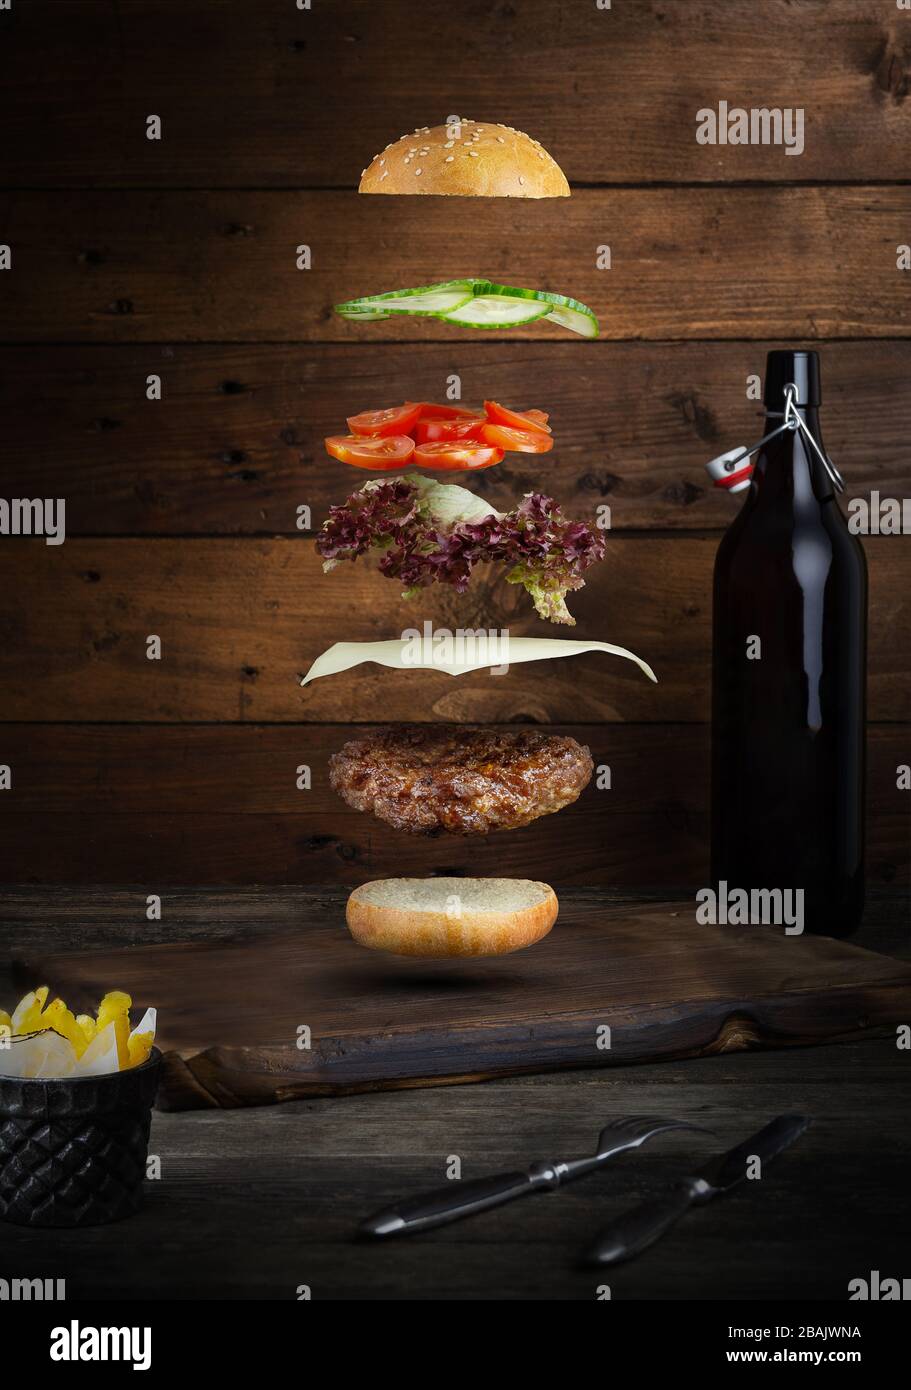 Meat burger with flying ingredients, isolated, with copyspace for text or logo, black background and bright colors Stock Photo